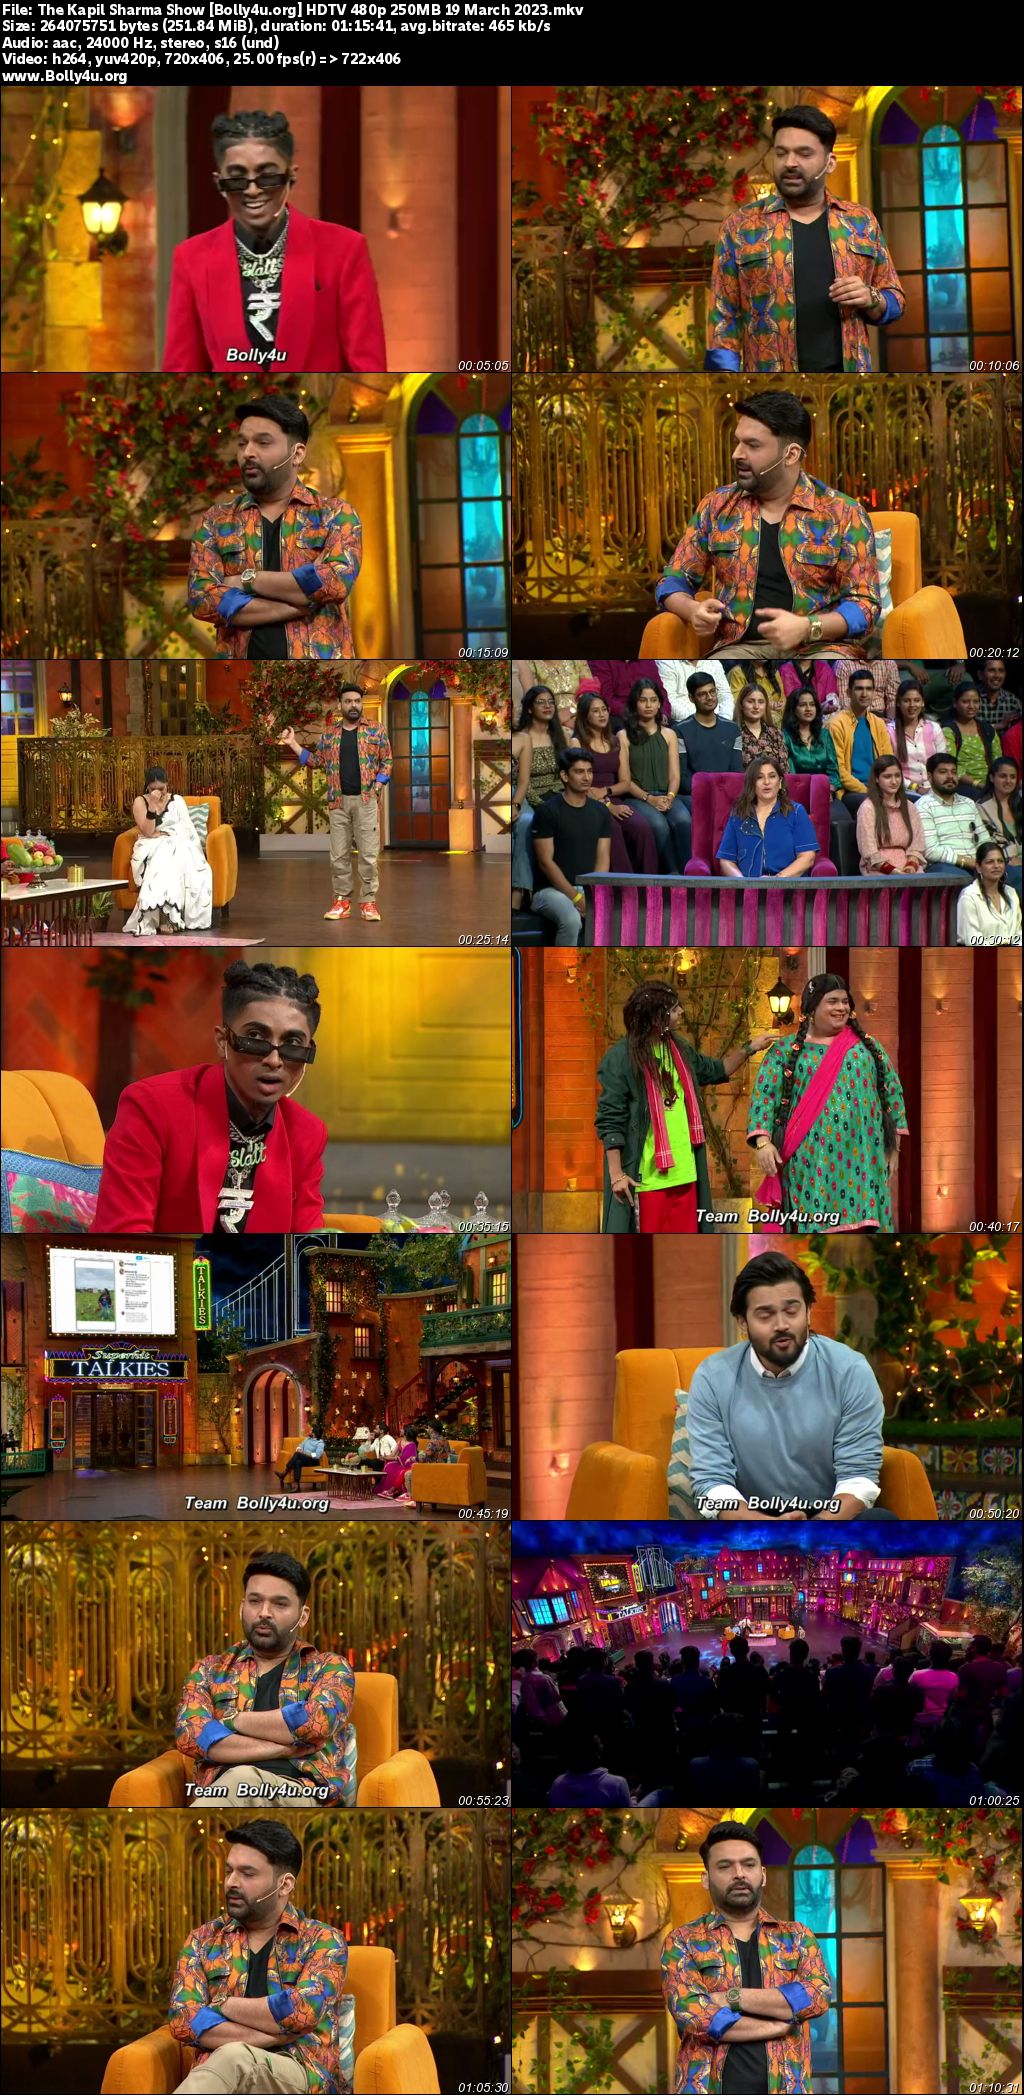 The Kapil Sharma Show HDTV 480p 250MB 19 March 2023 Download